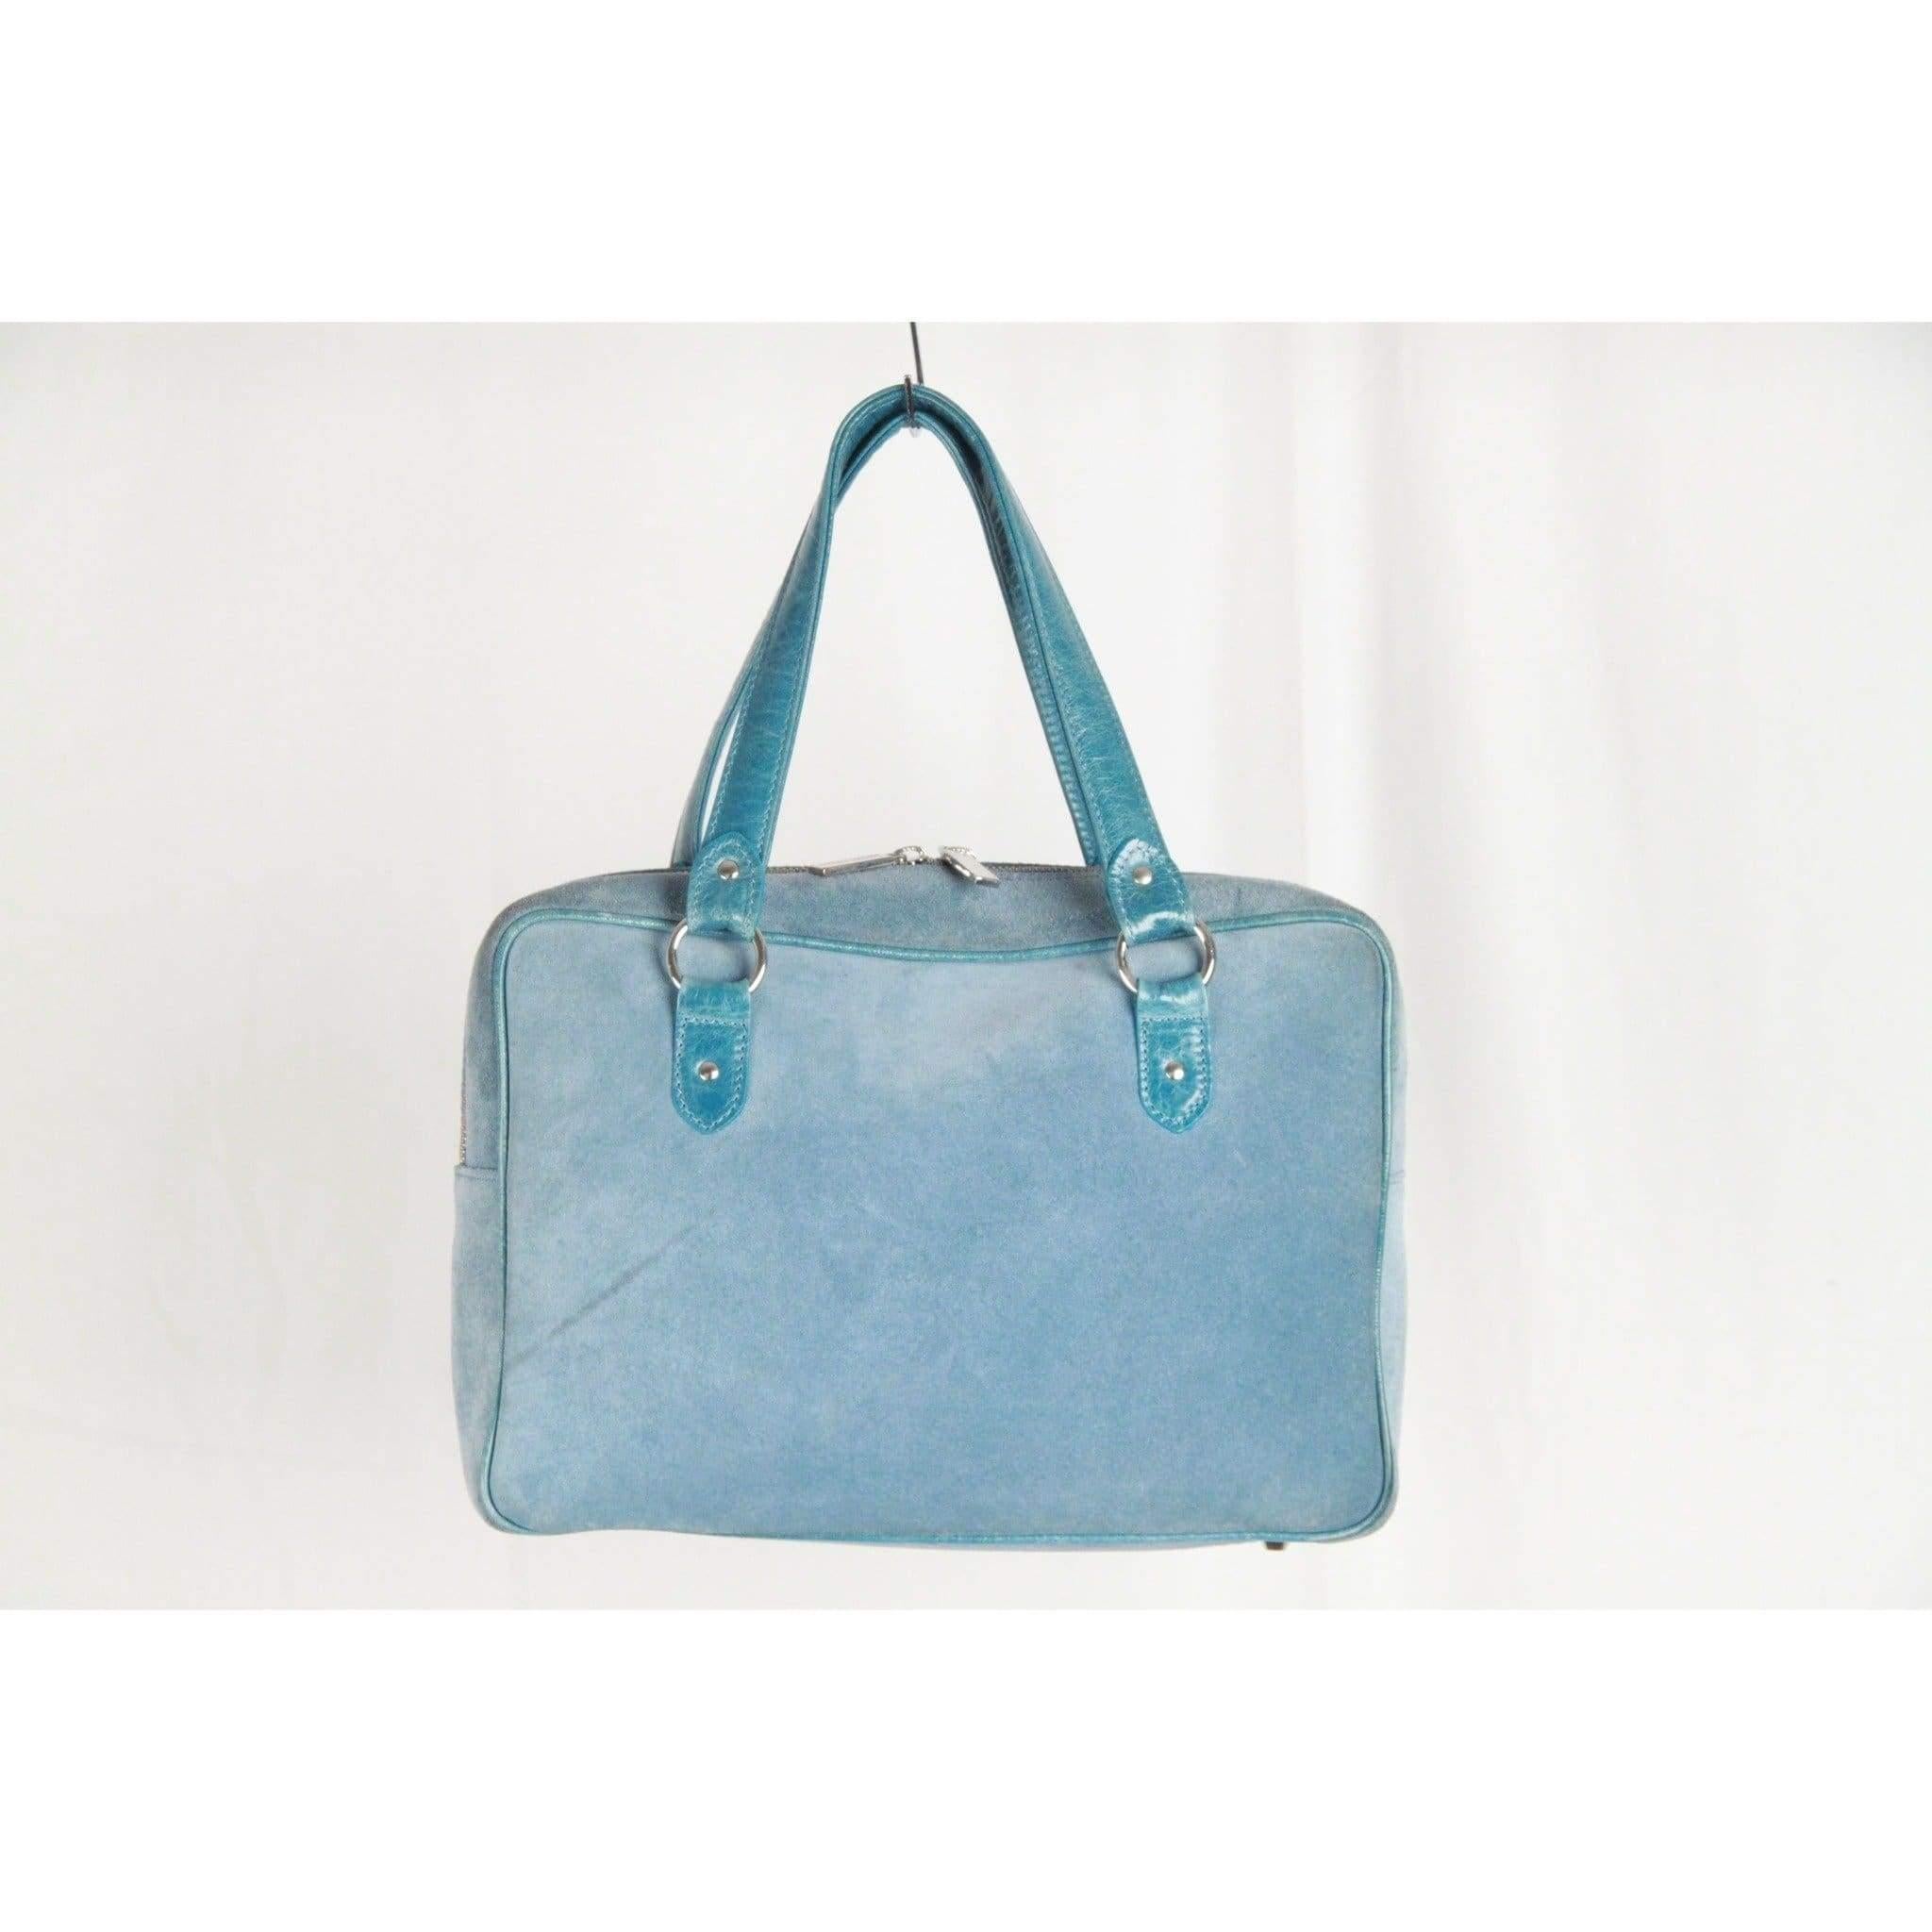 MATERIAL: Suede COLOR: Blue MODEL: Satchel GENDER: Women SIZE: Medium Condition CONDITION DETAILS: B :GOOD CONDITION - Some light wear of use - Some normal wear of use on bottom corners, minimal darkness on leather, a couple of small stains on the